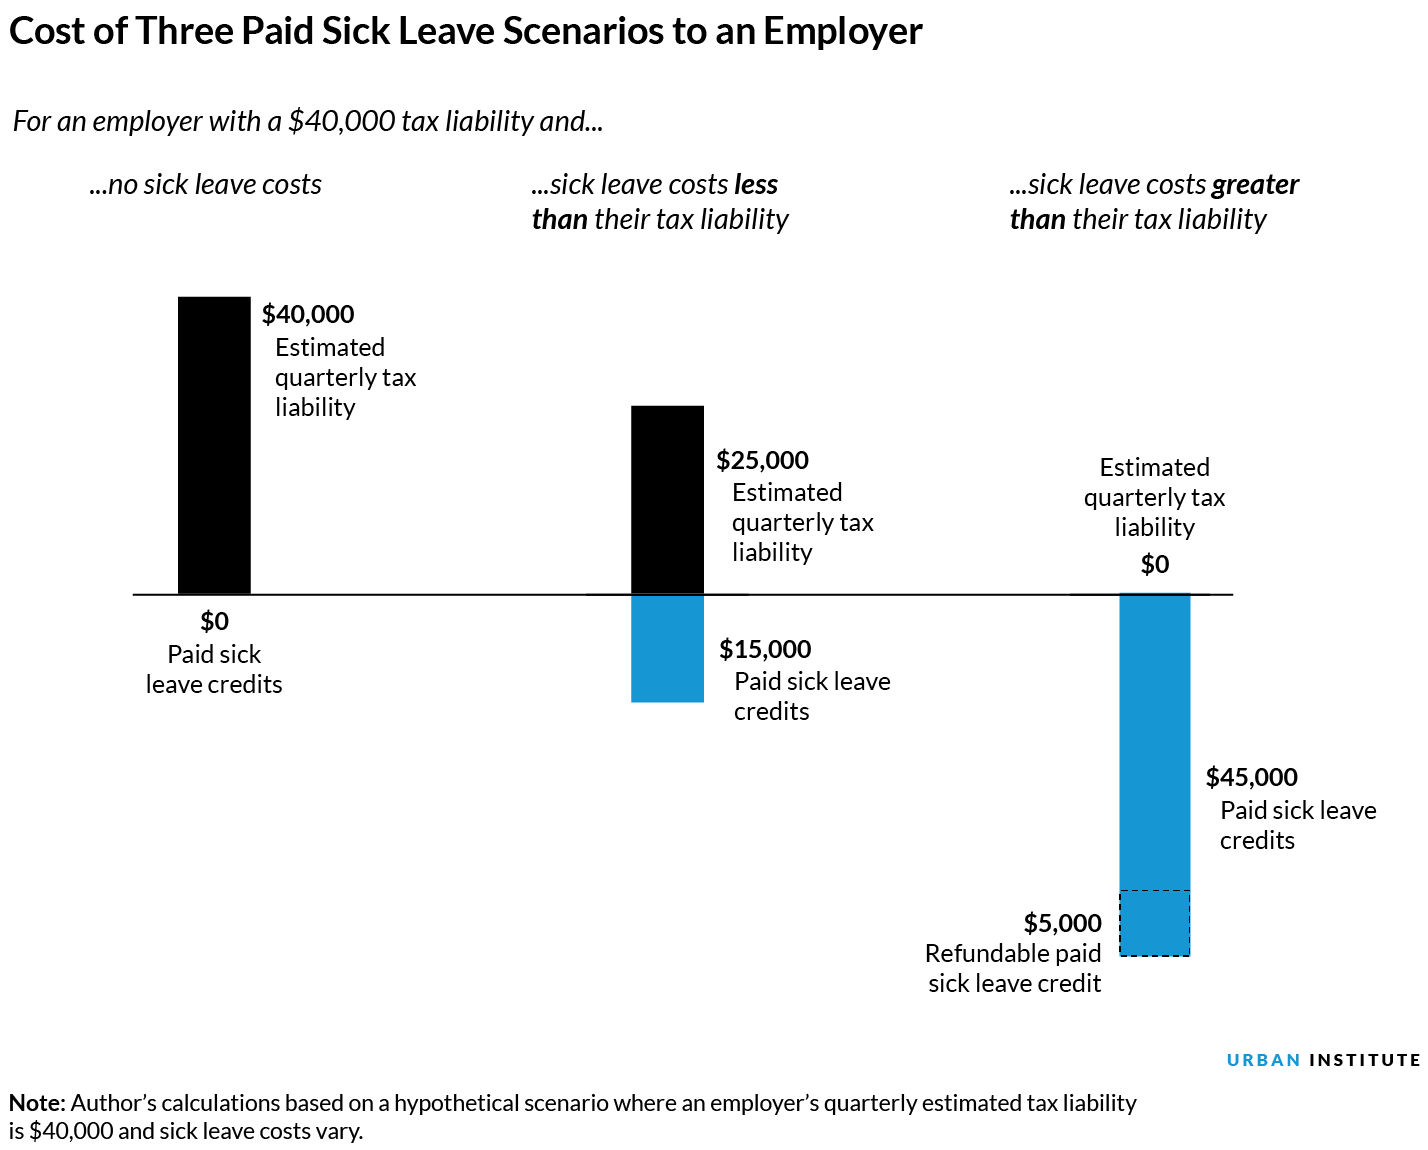 Cost of three paid sick leave scenarios to an employer with a $40,000 tax liability